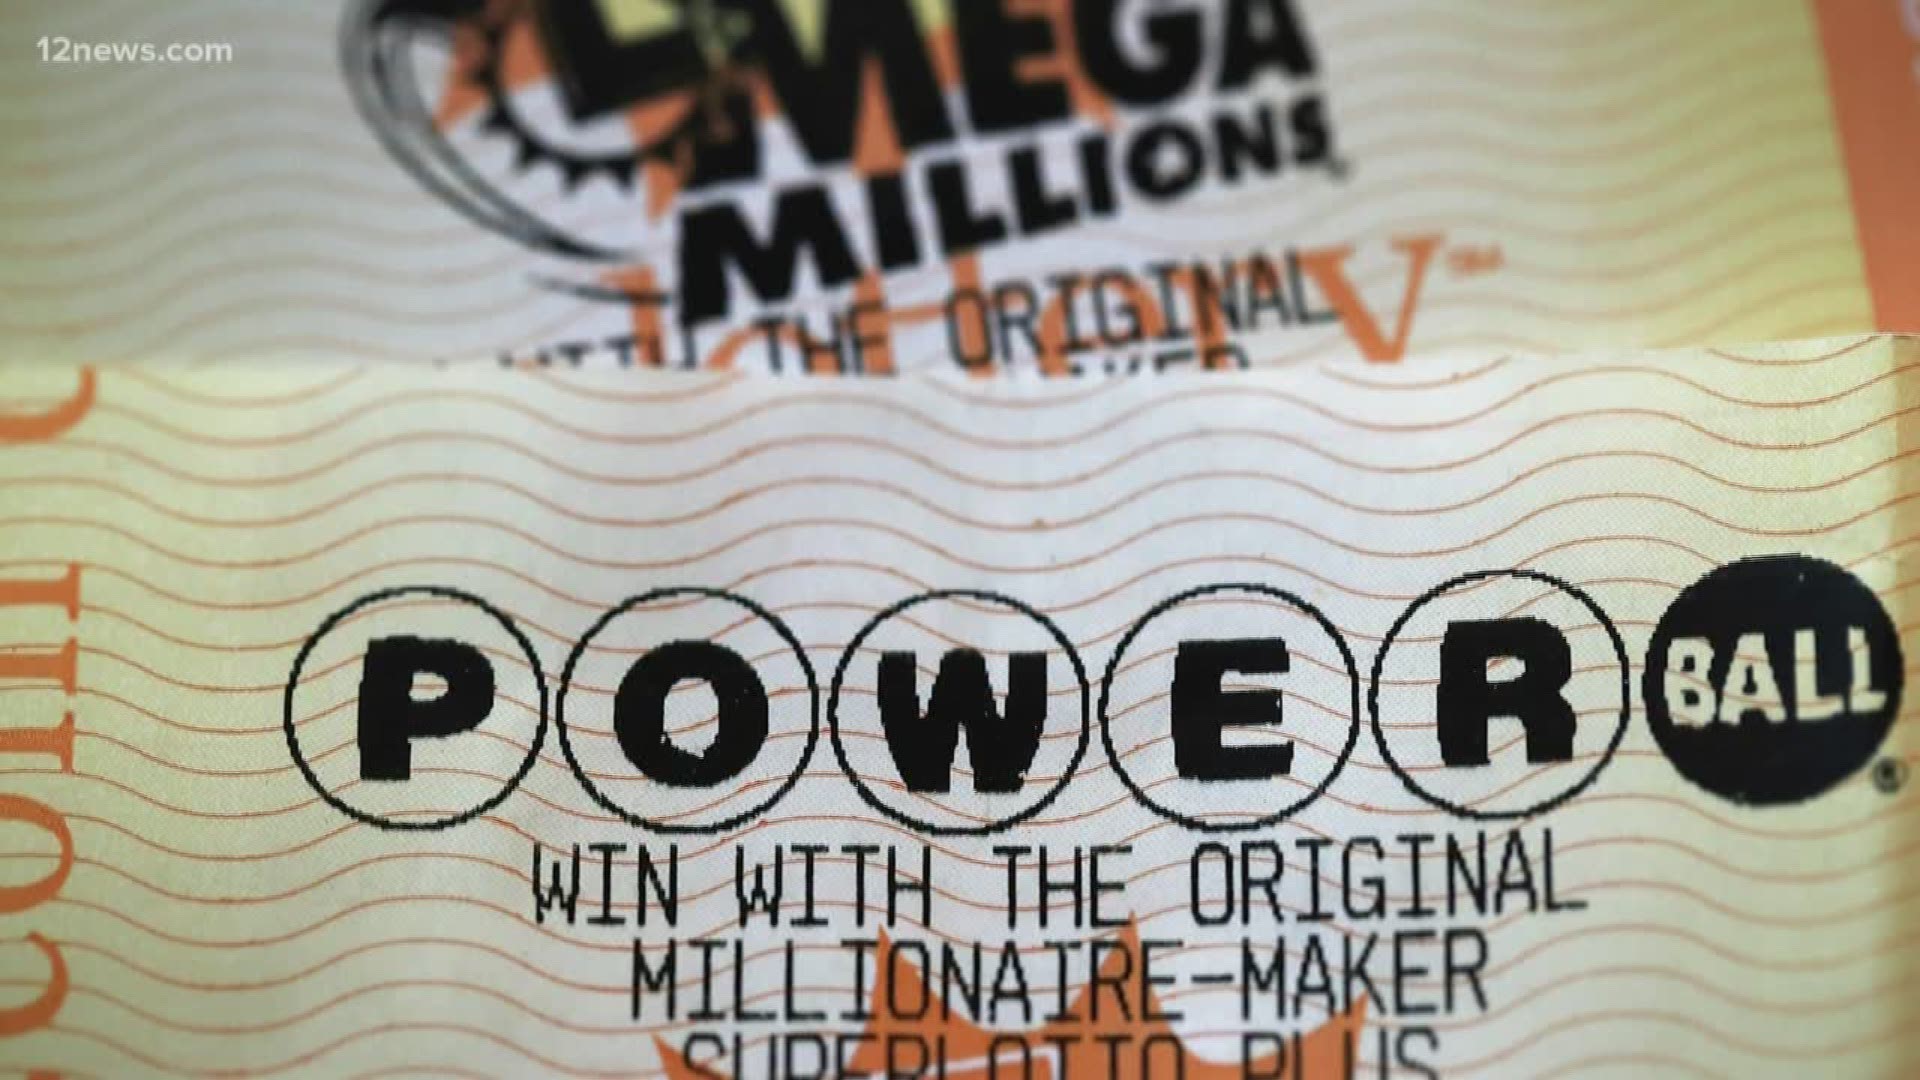 Lotto fever is sweeping the nation as the Mega Millions nears a $1 billion jackpot. We verify if there is a way to increase your odds of winning.